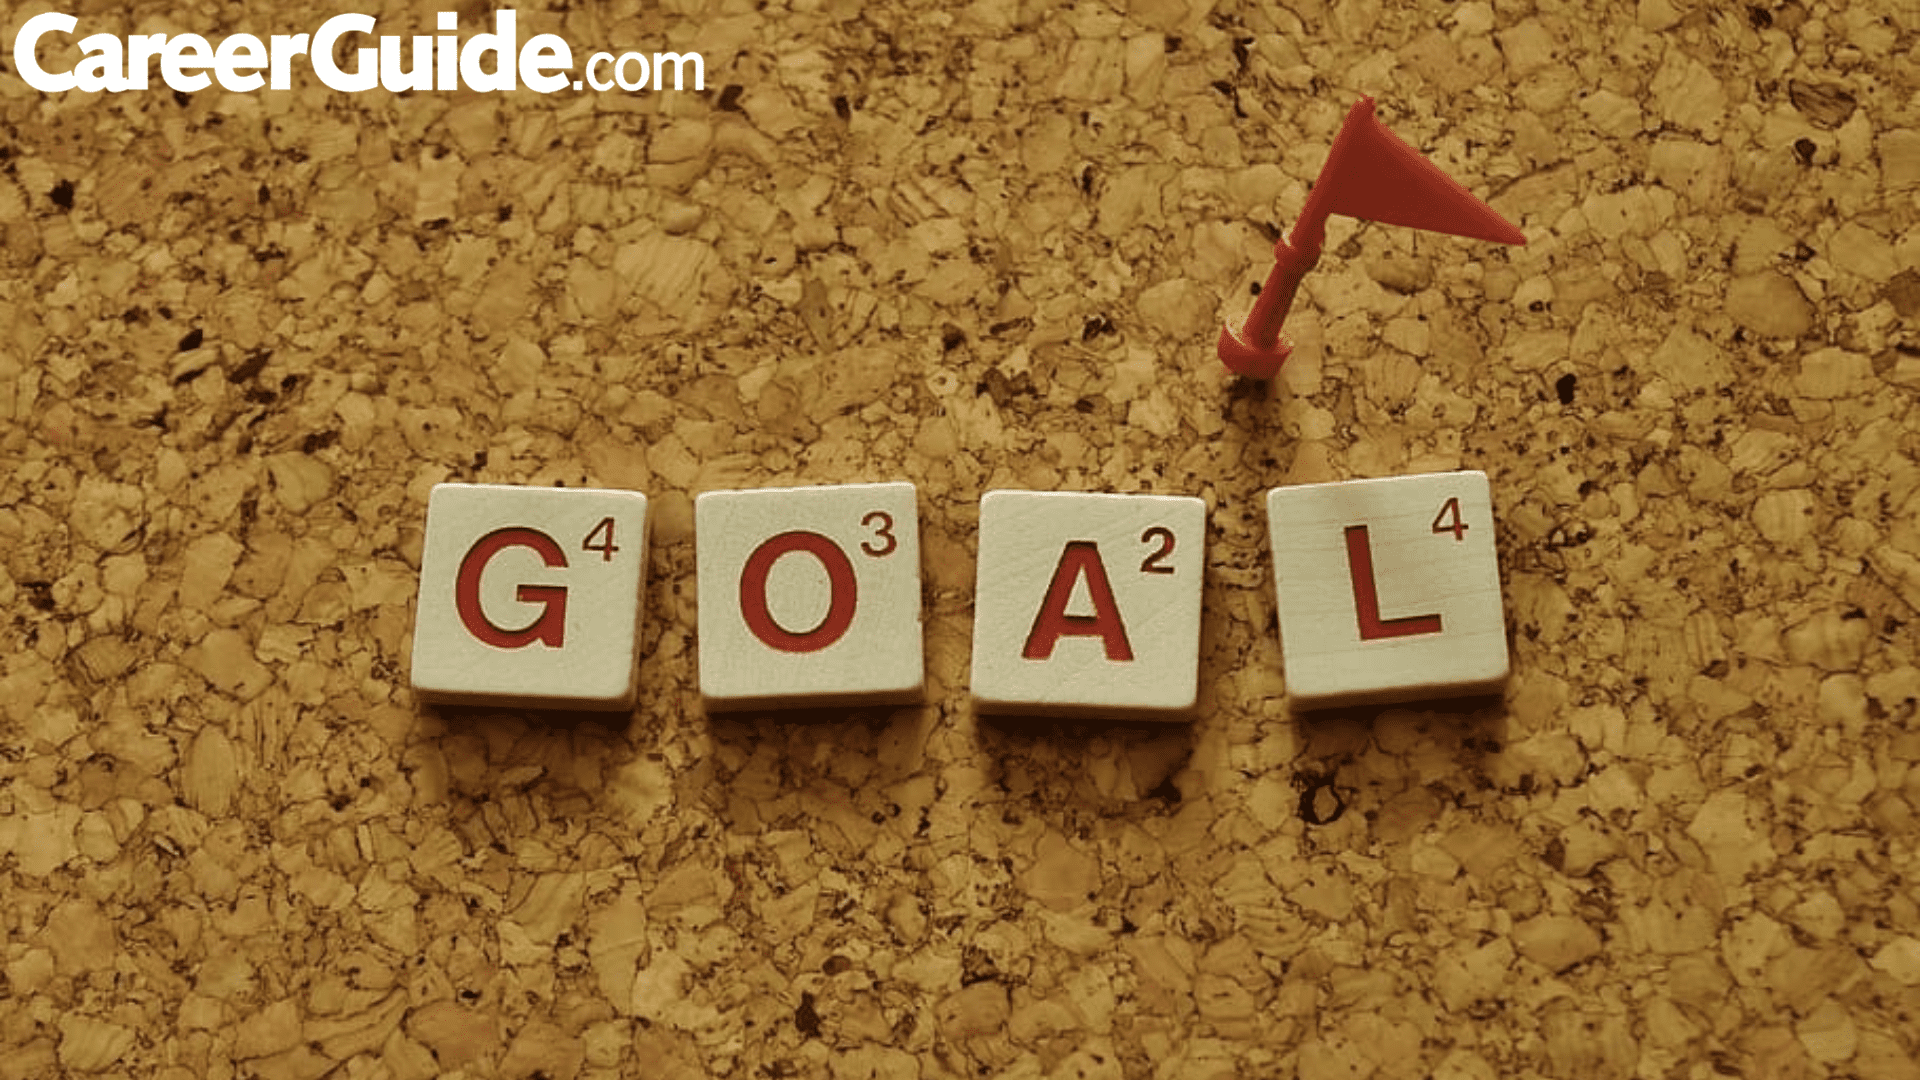 Ensure To Award Yourself Every Time You Gain Your Weekly Goals. (1)